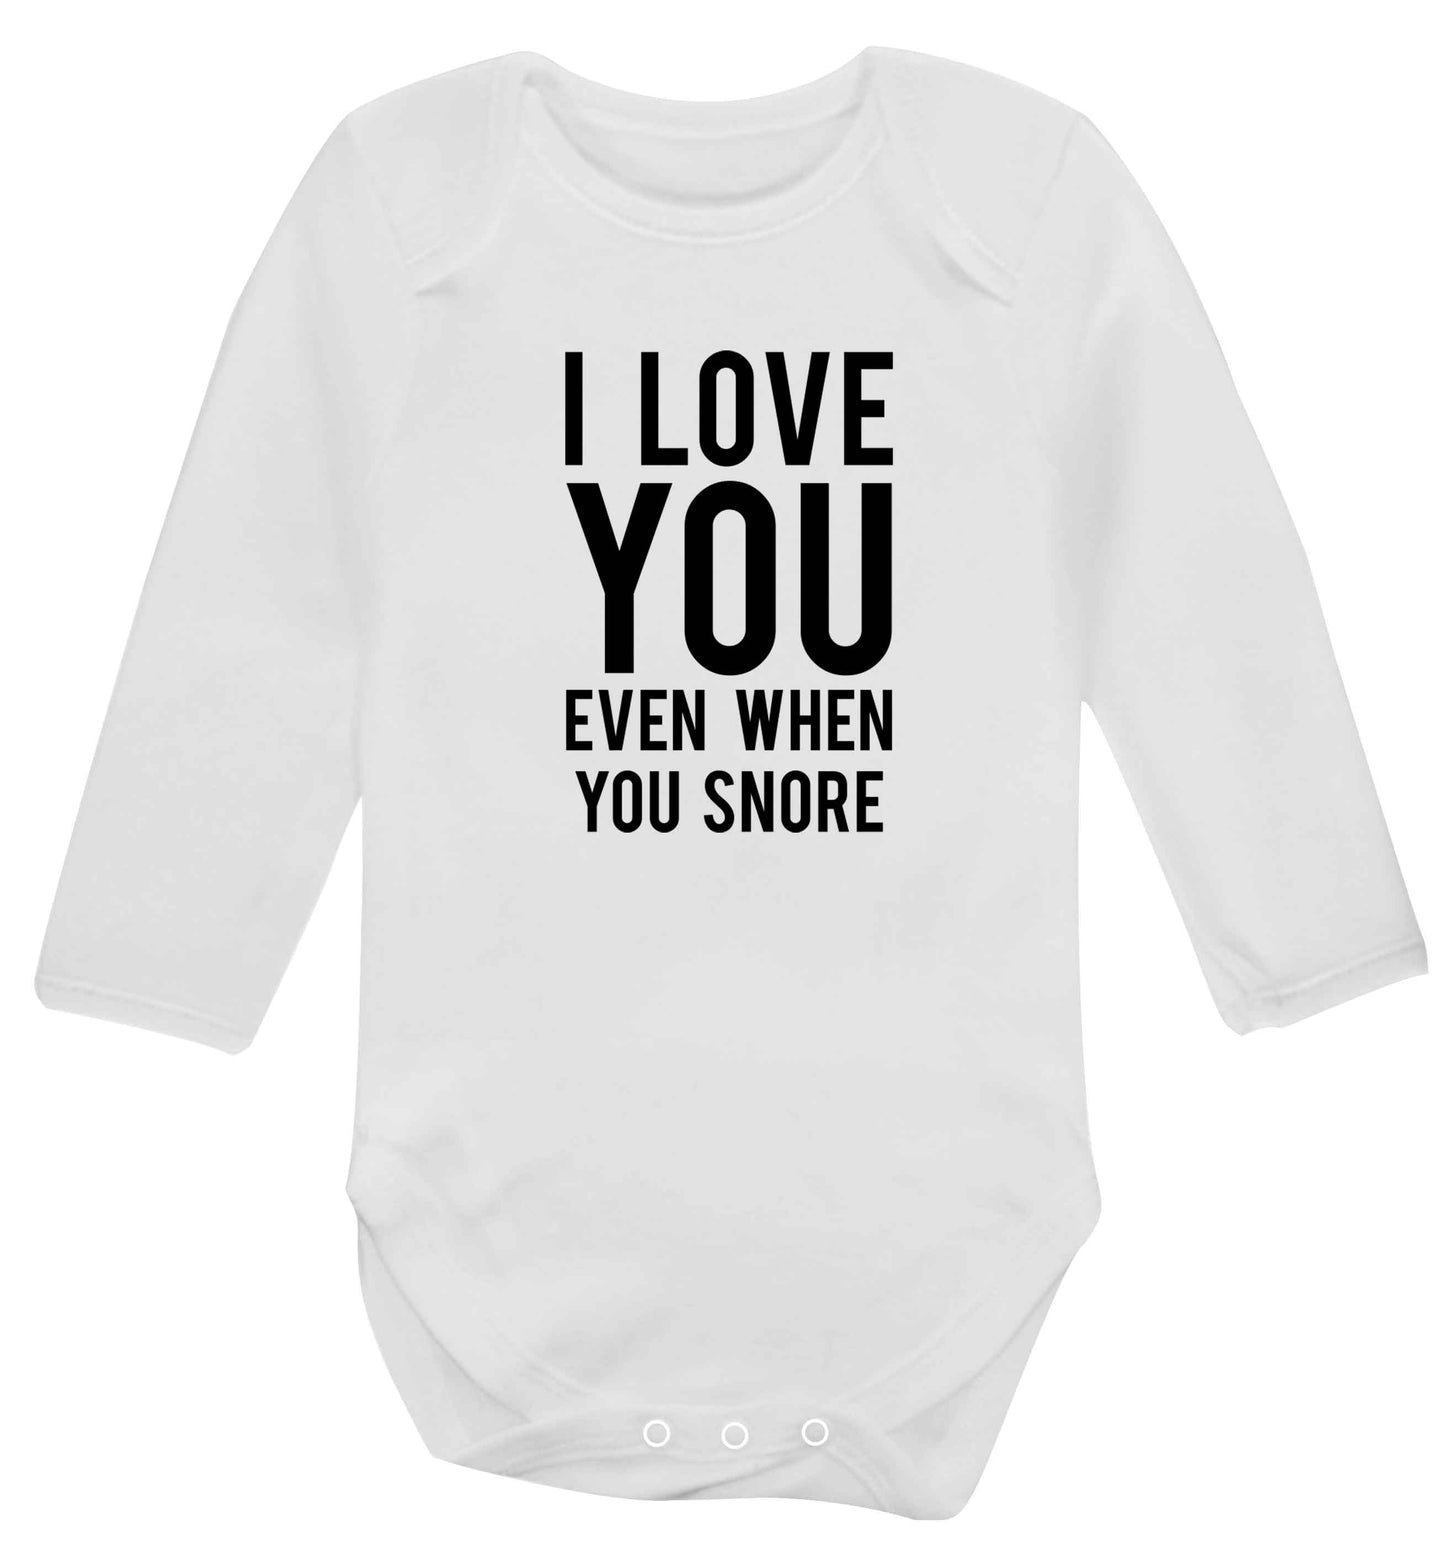 I love you even when you snore baby vest long sleeved white 6-12 months